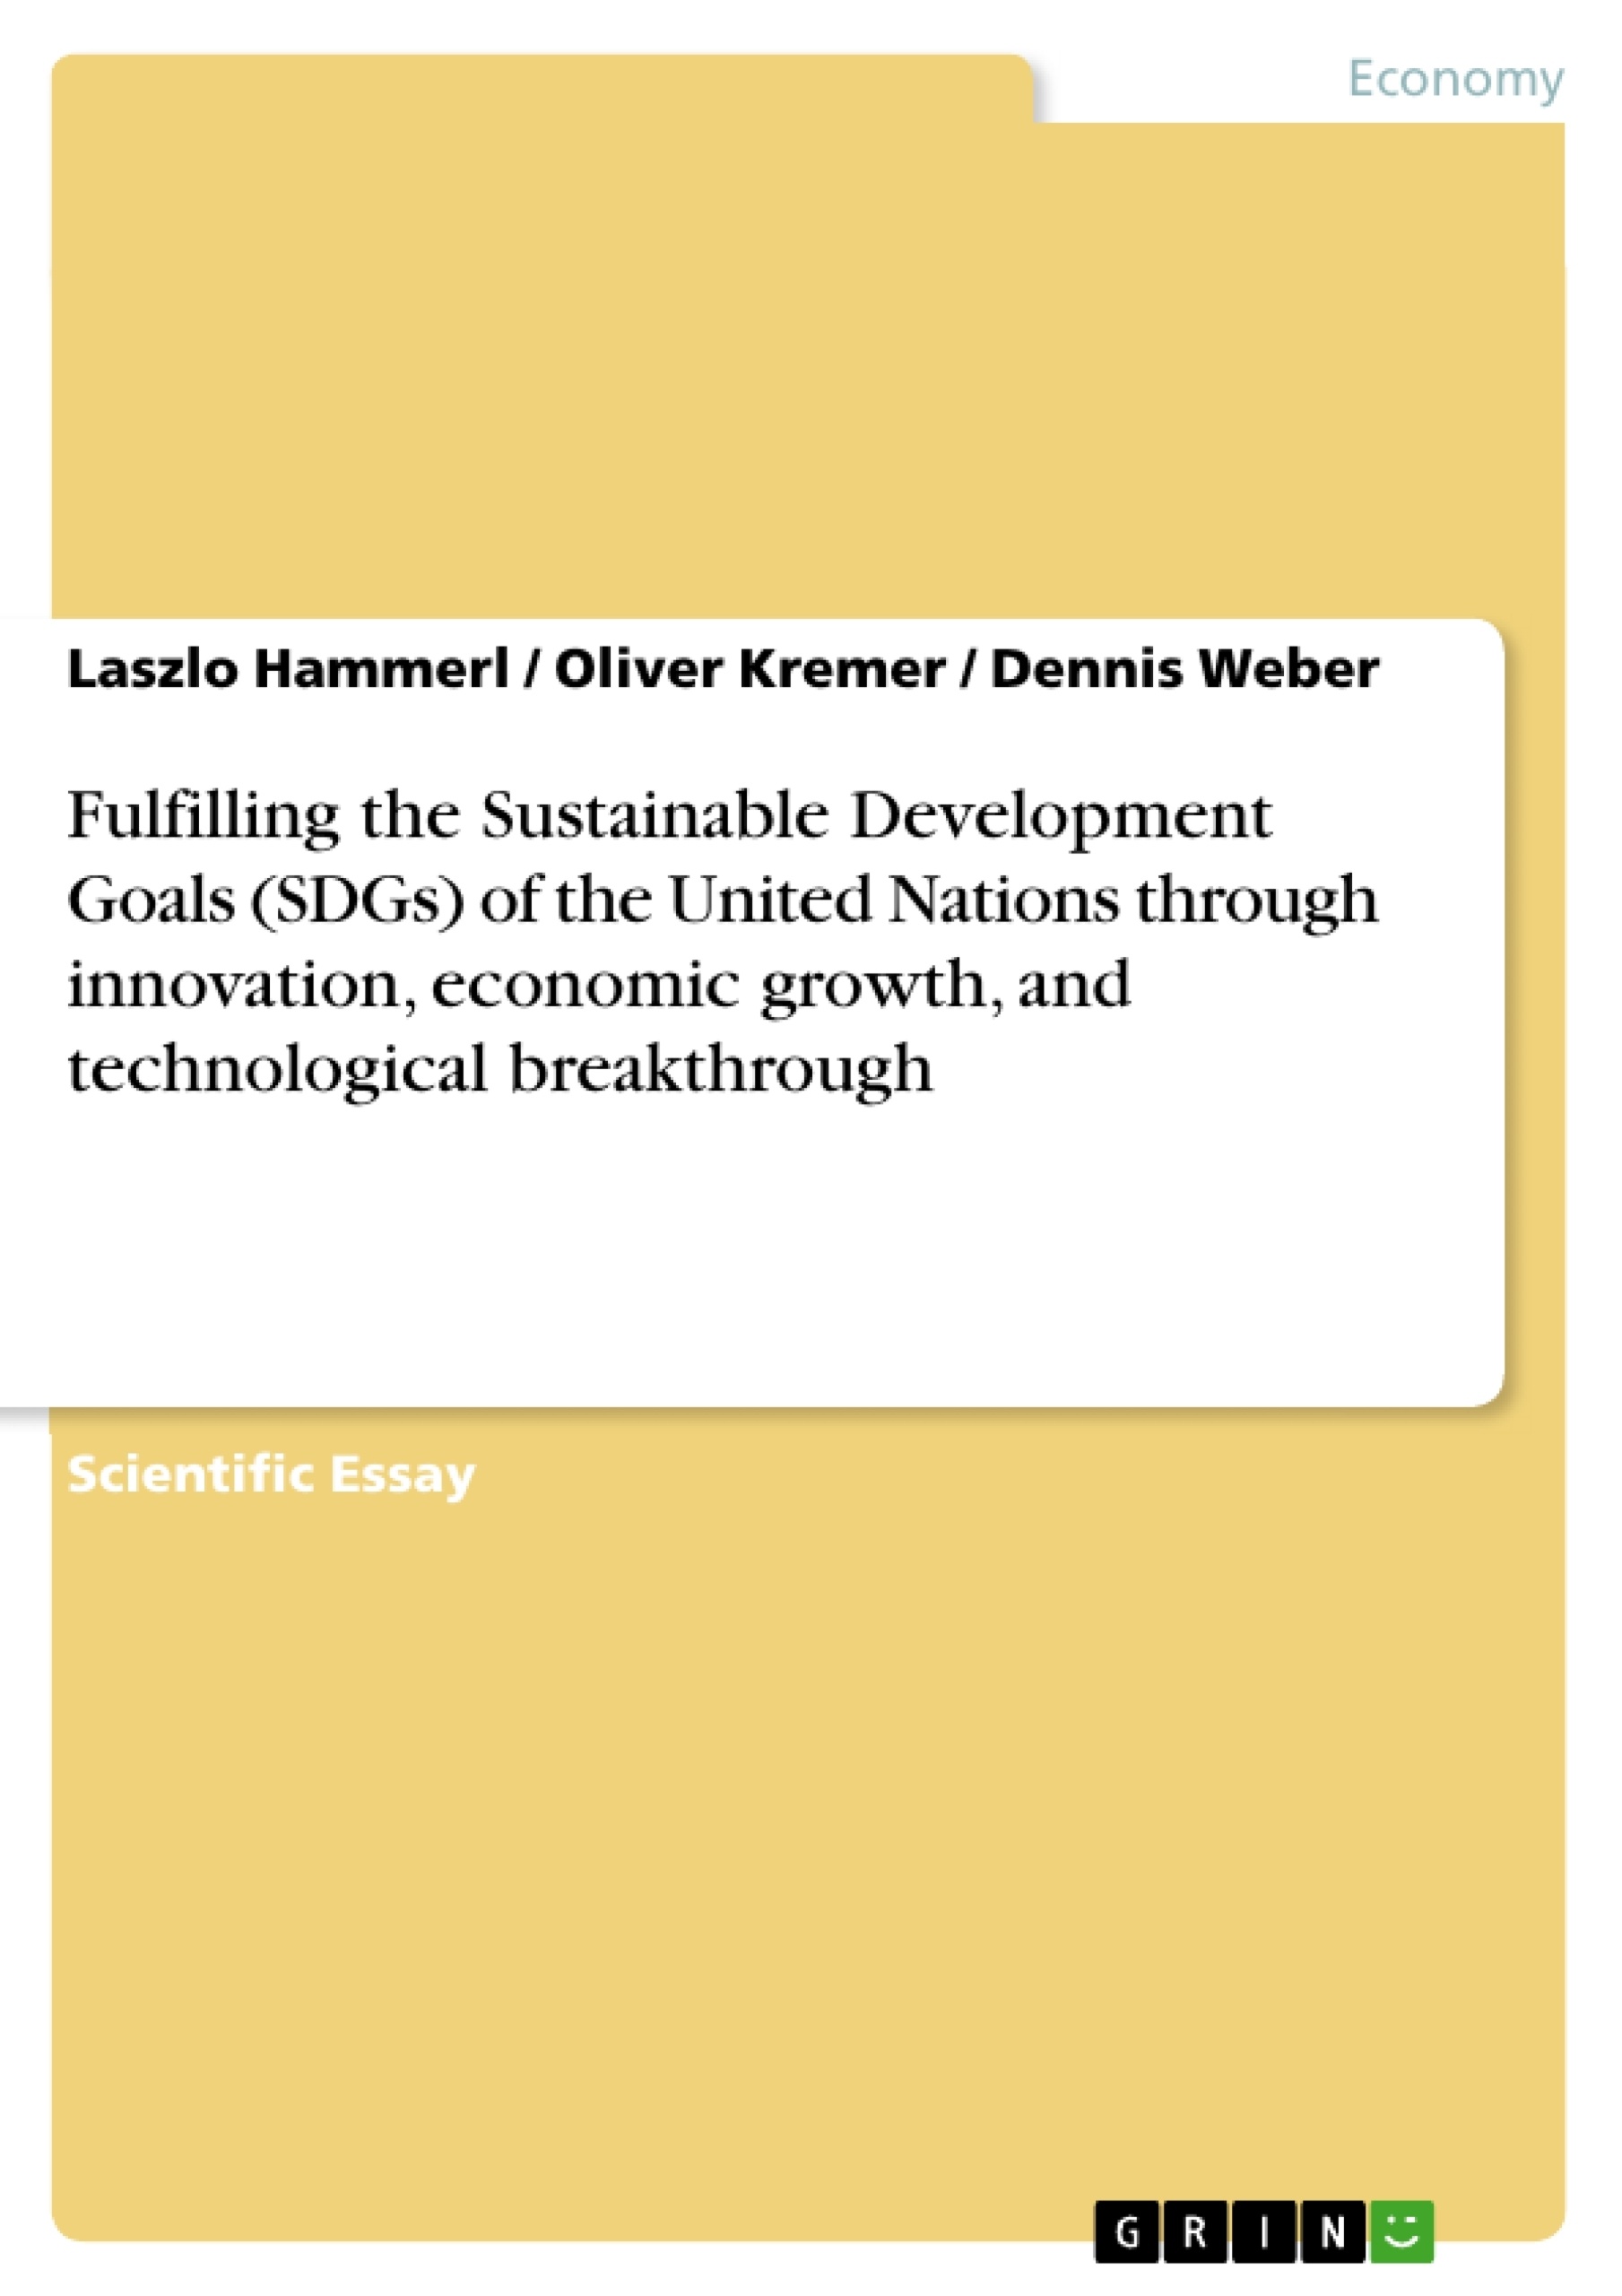 Titre: Fulfilling the Sustainable Development Goals (SDGs) of the United Nations through innovation, economic growth, and technological breakthrough